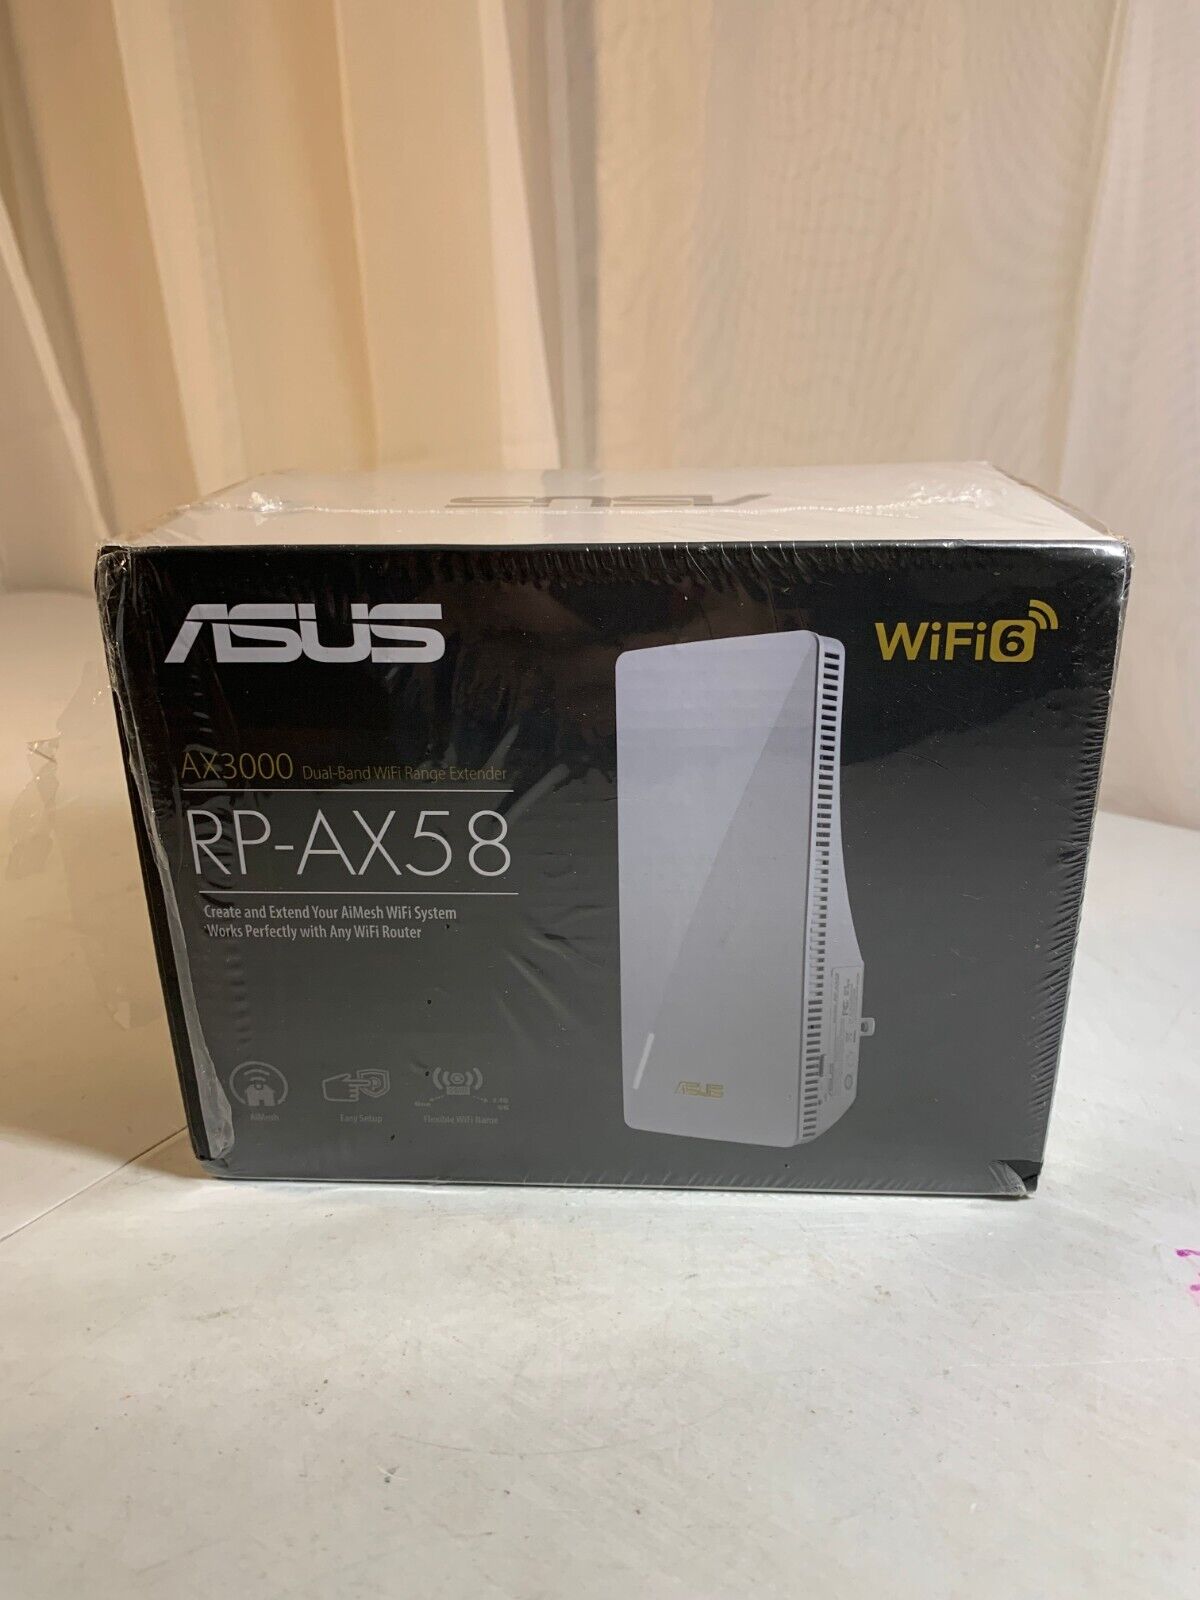 Asus RP-AX58 White High Speed AX3000 Wireless Dual Band WiFi Range Extender